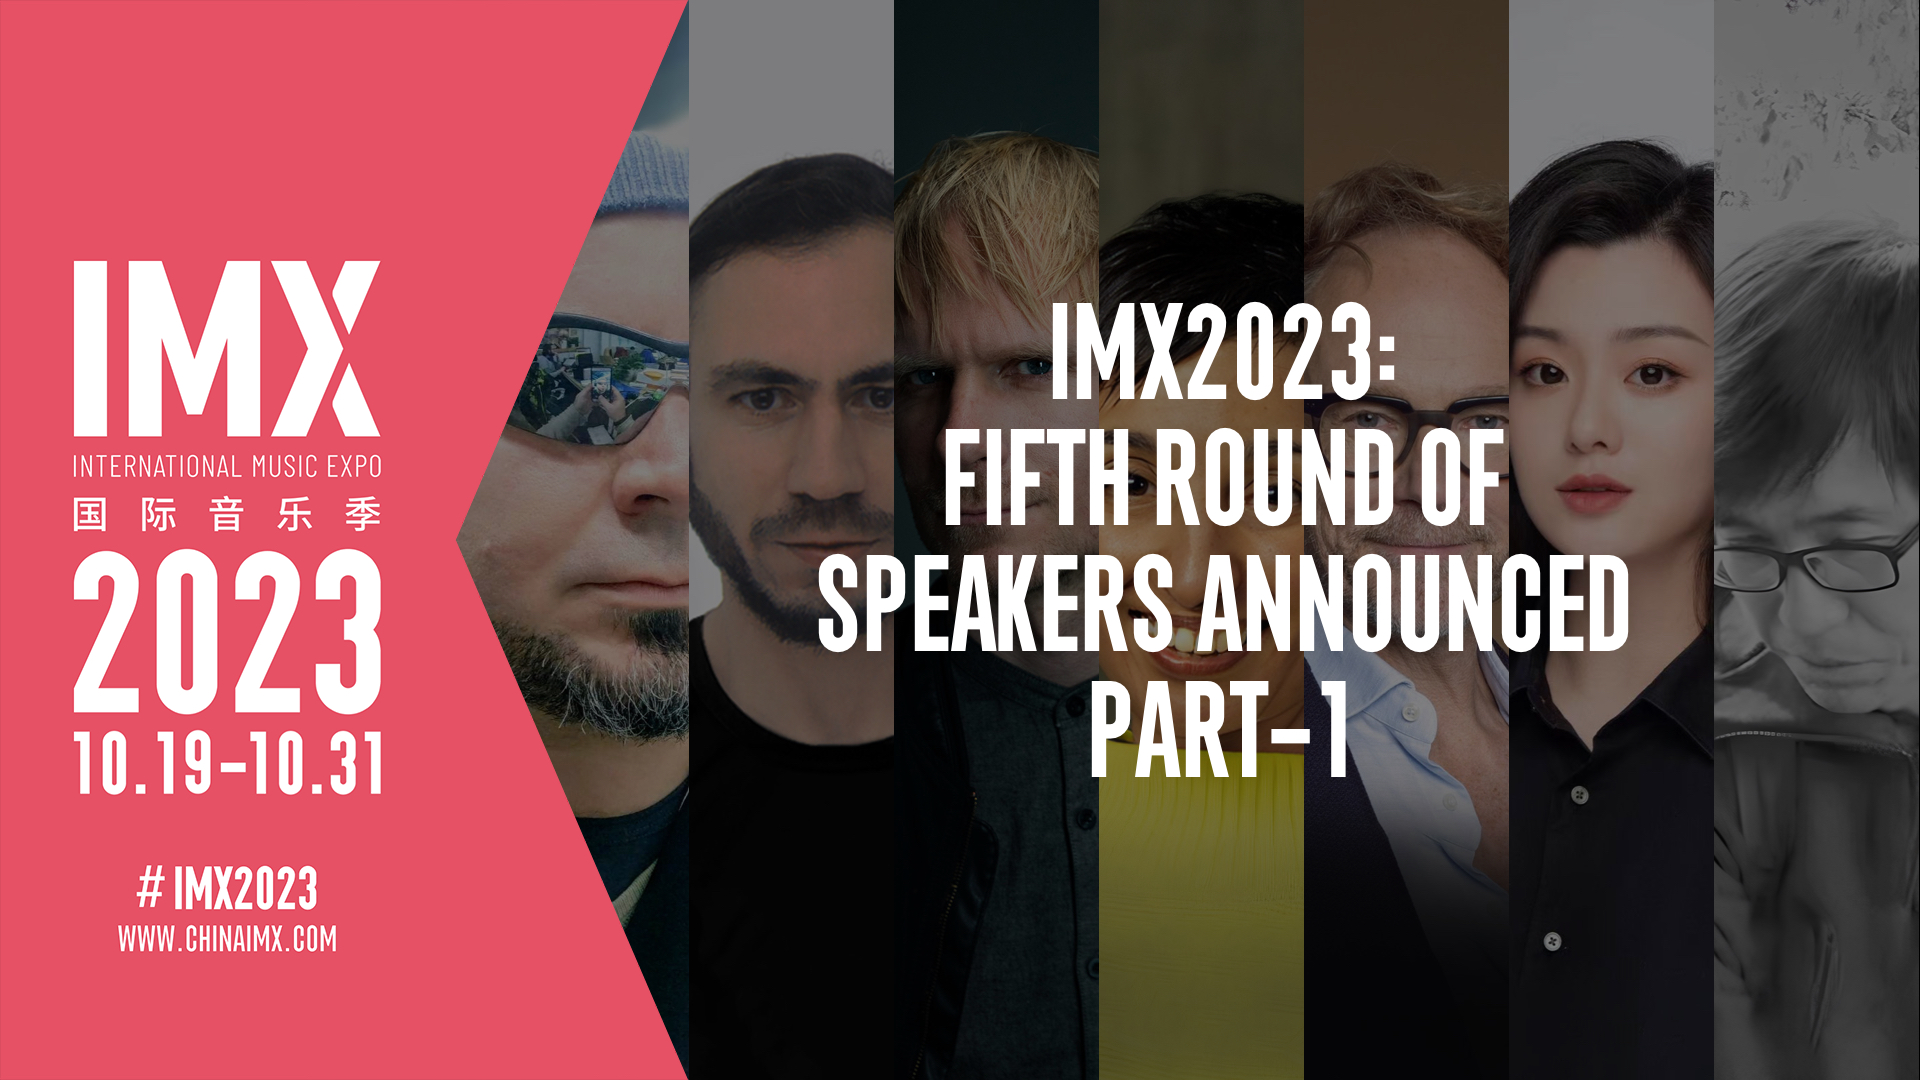 IMX 2023 Fifth Round of Speakers Part 1